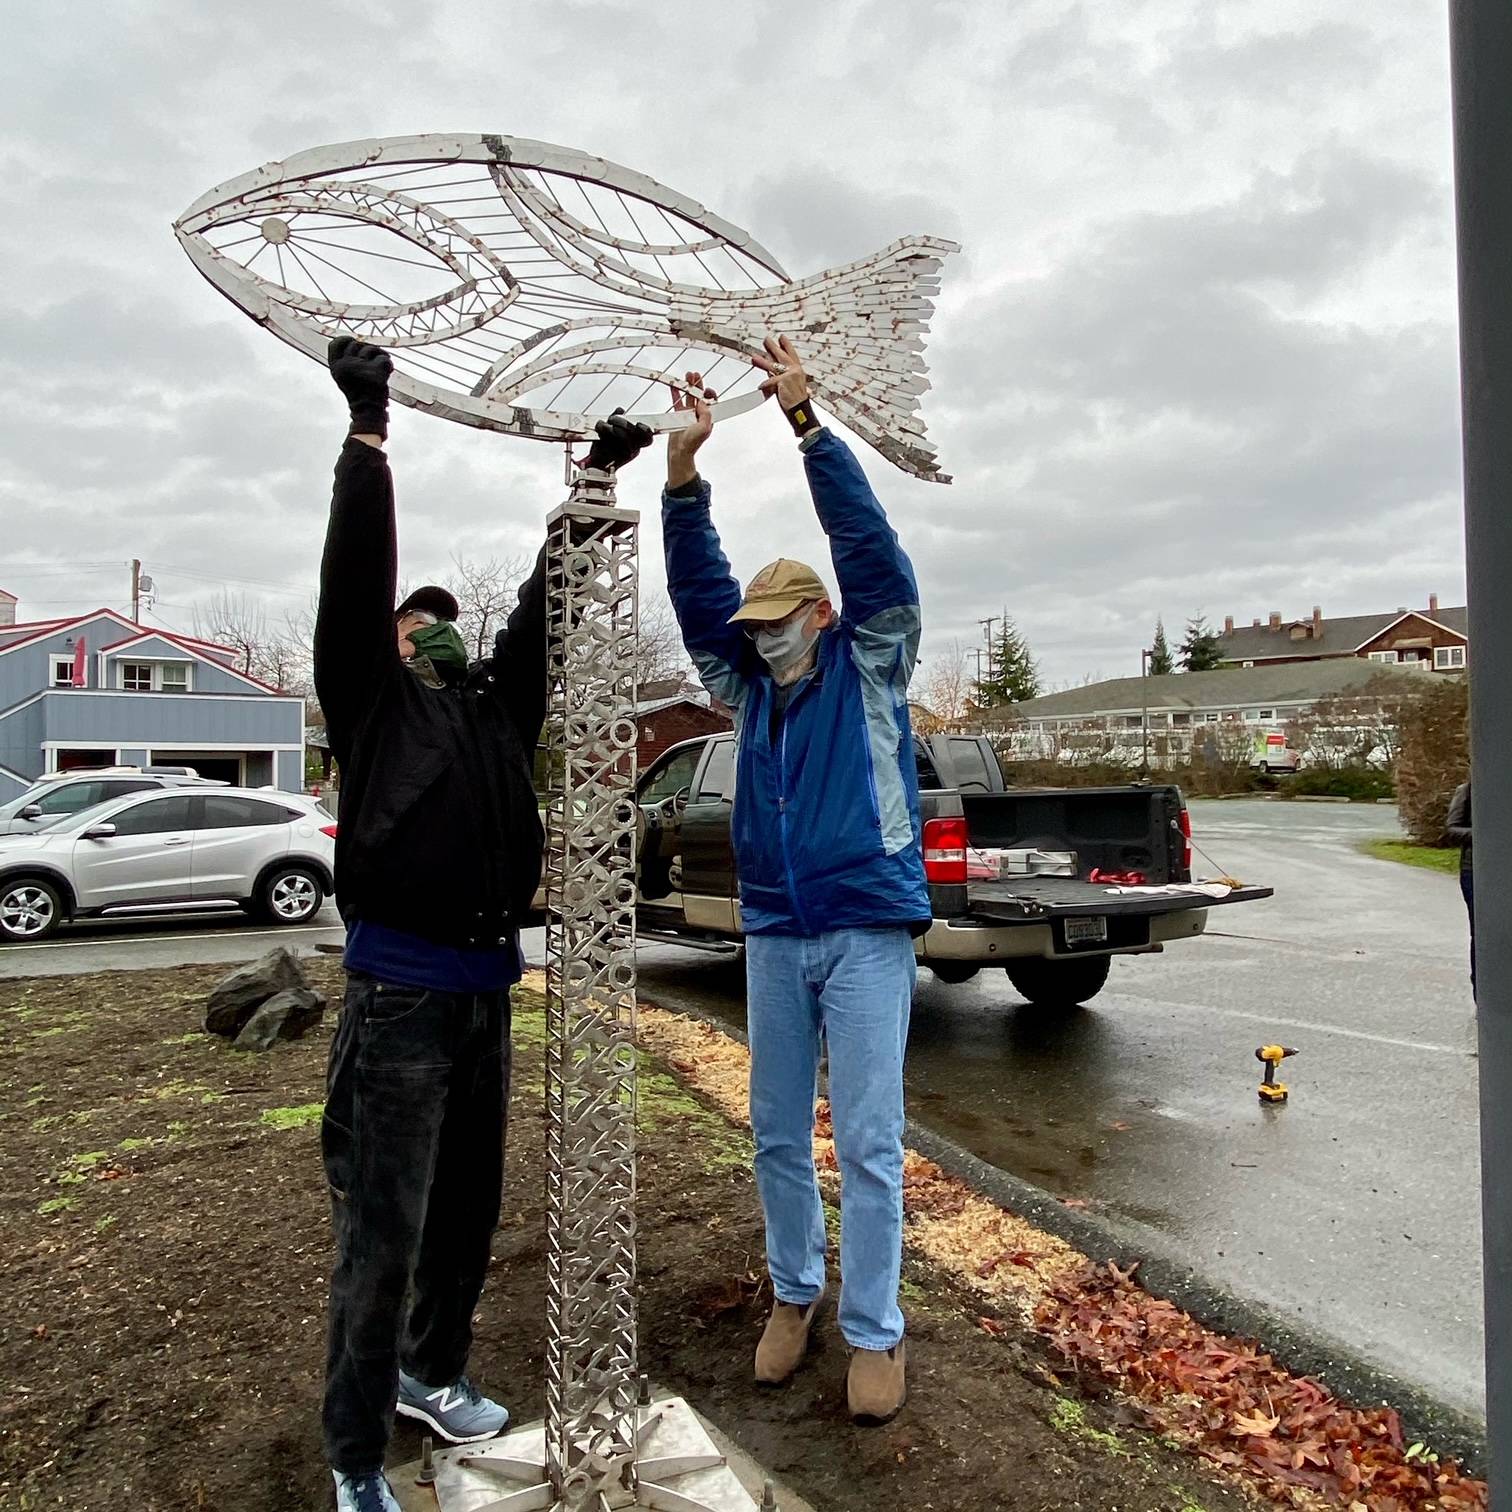 Artist Wayne Kangas, left, and Langley Arts Fund member Don Wodjenski install the Village by the Sea’s newest public art feature, a weather vane. Photo provided